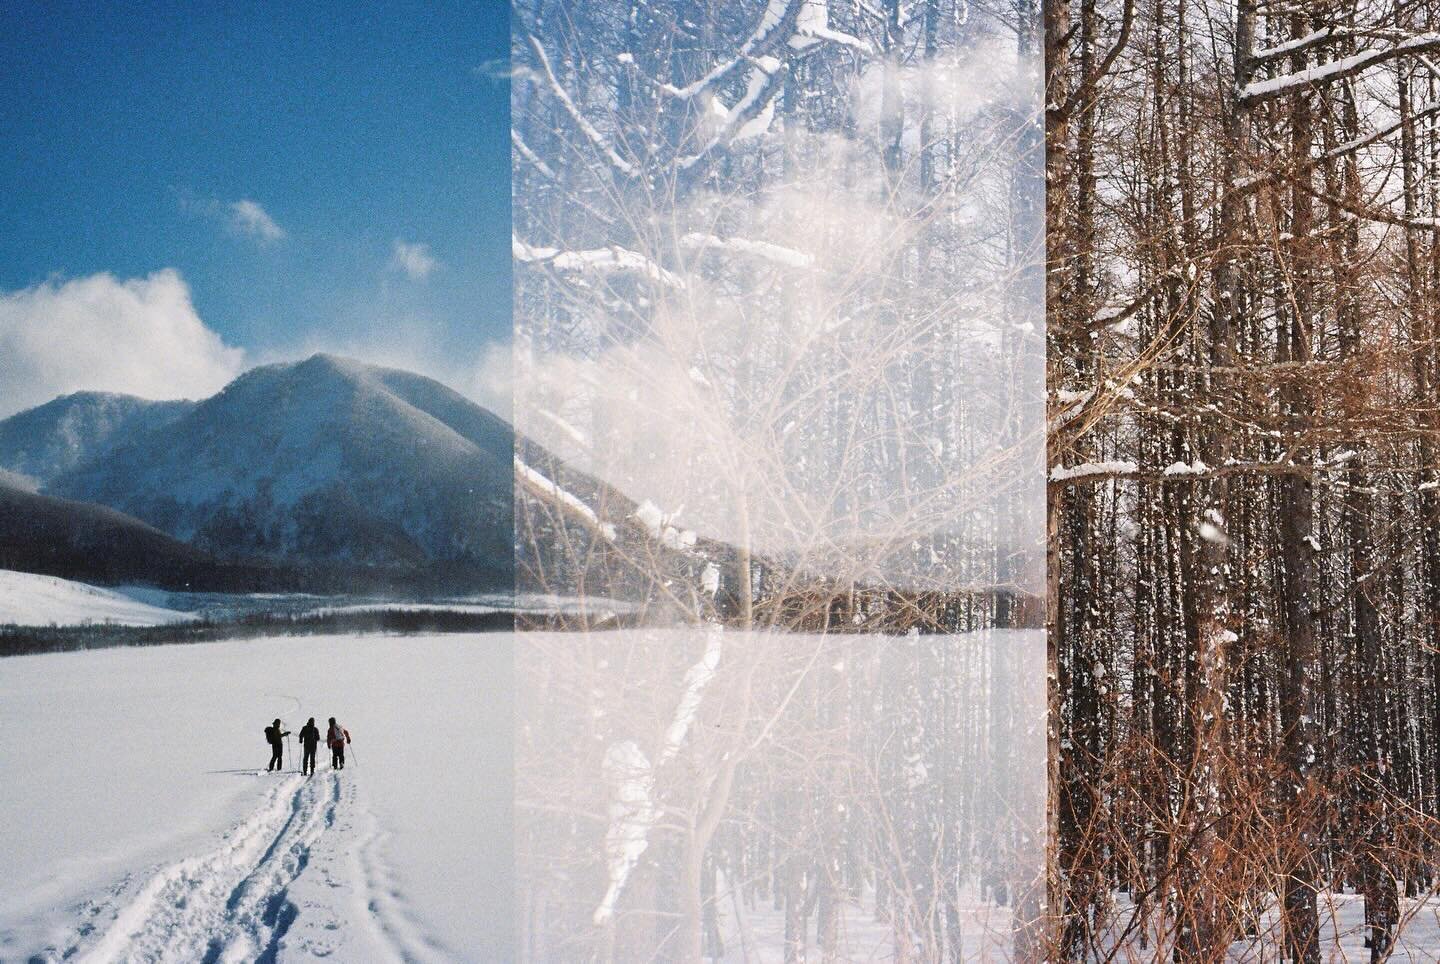 Some magic created on roll. Sometimes the mistakes lead to something way better than expected.  A beautiful  day hiking and skiing in Hokkaido, Niseko backcountry with @yutashimomura @seimenabt and @lueuek 🤗🤗 
Just got the results of what I shot in